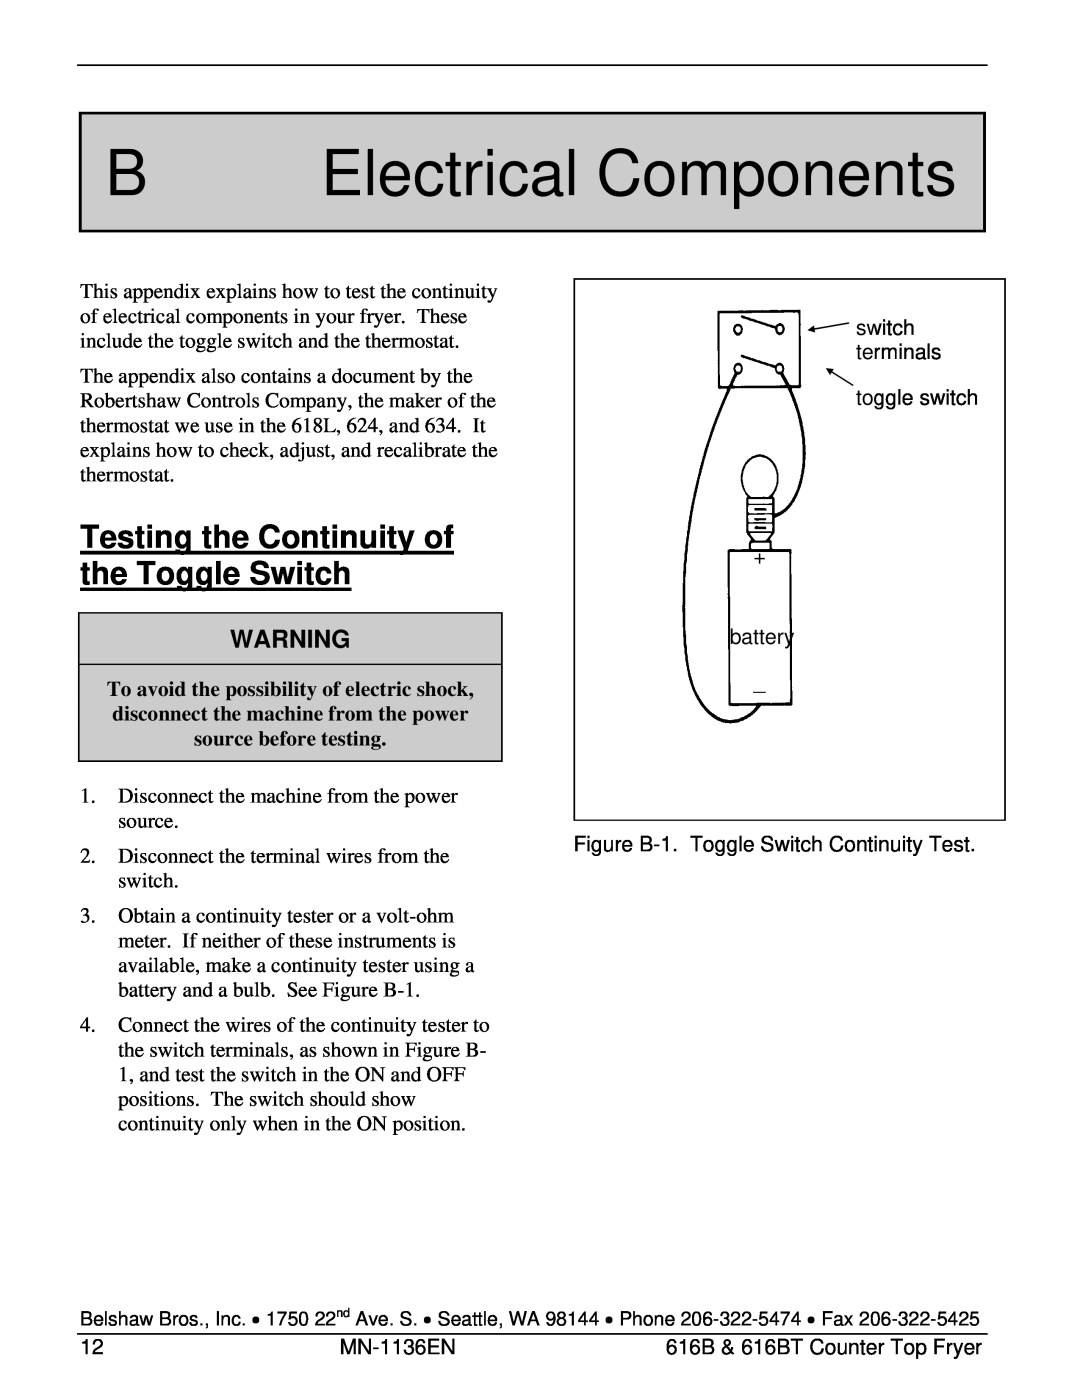 Belshaw Brothers 616BT manual B Electrical Components, Testing the Continuity of the Toggle Switch 